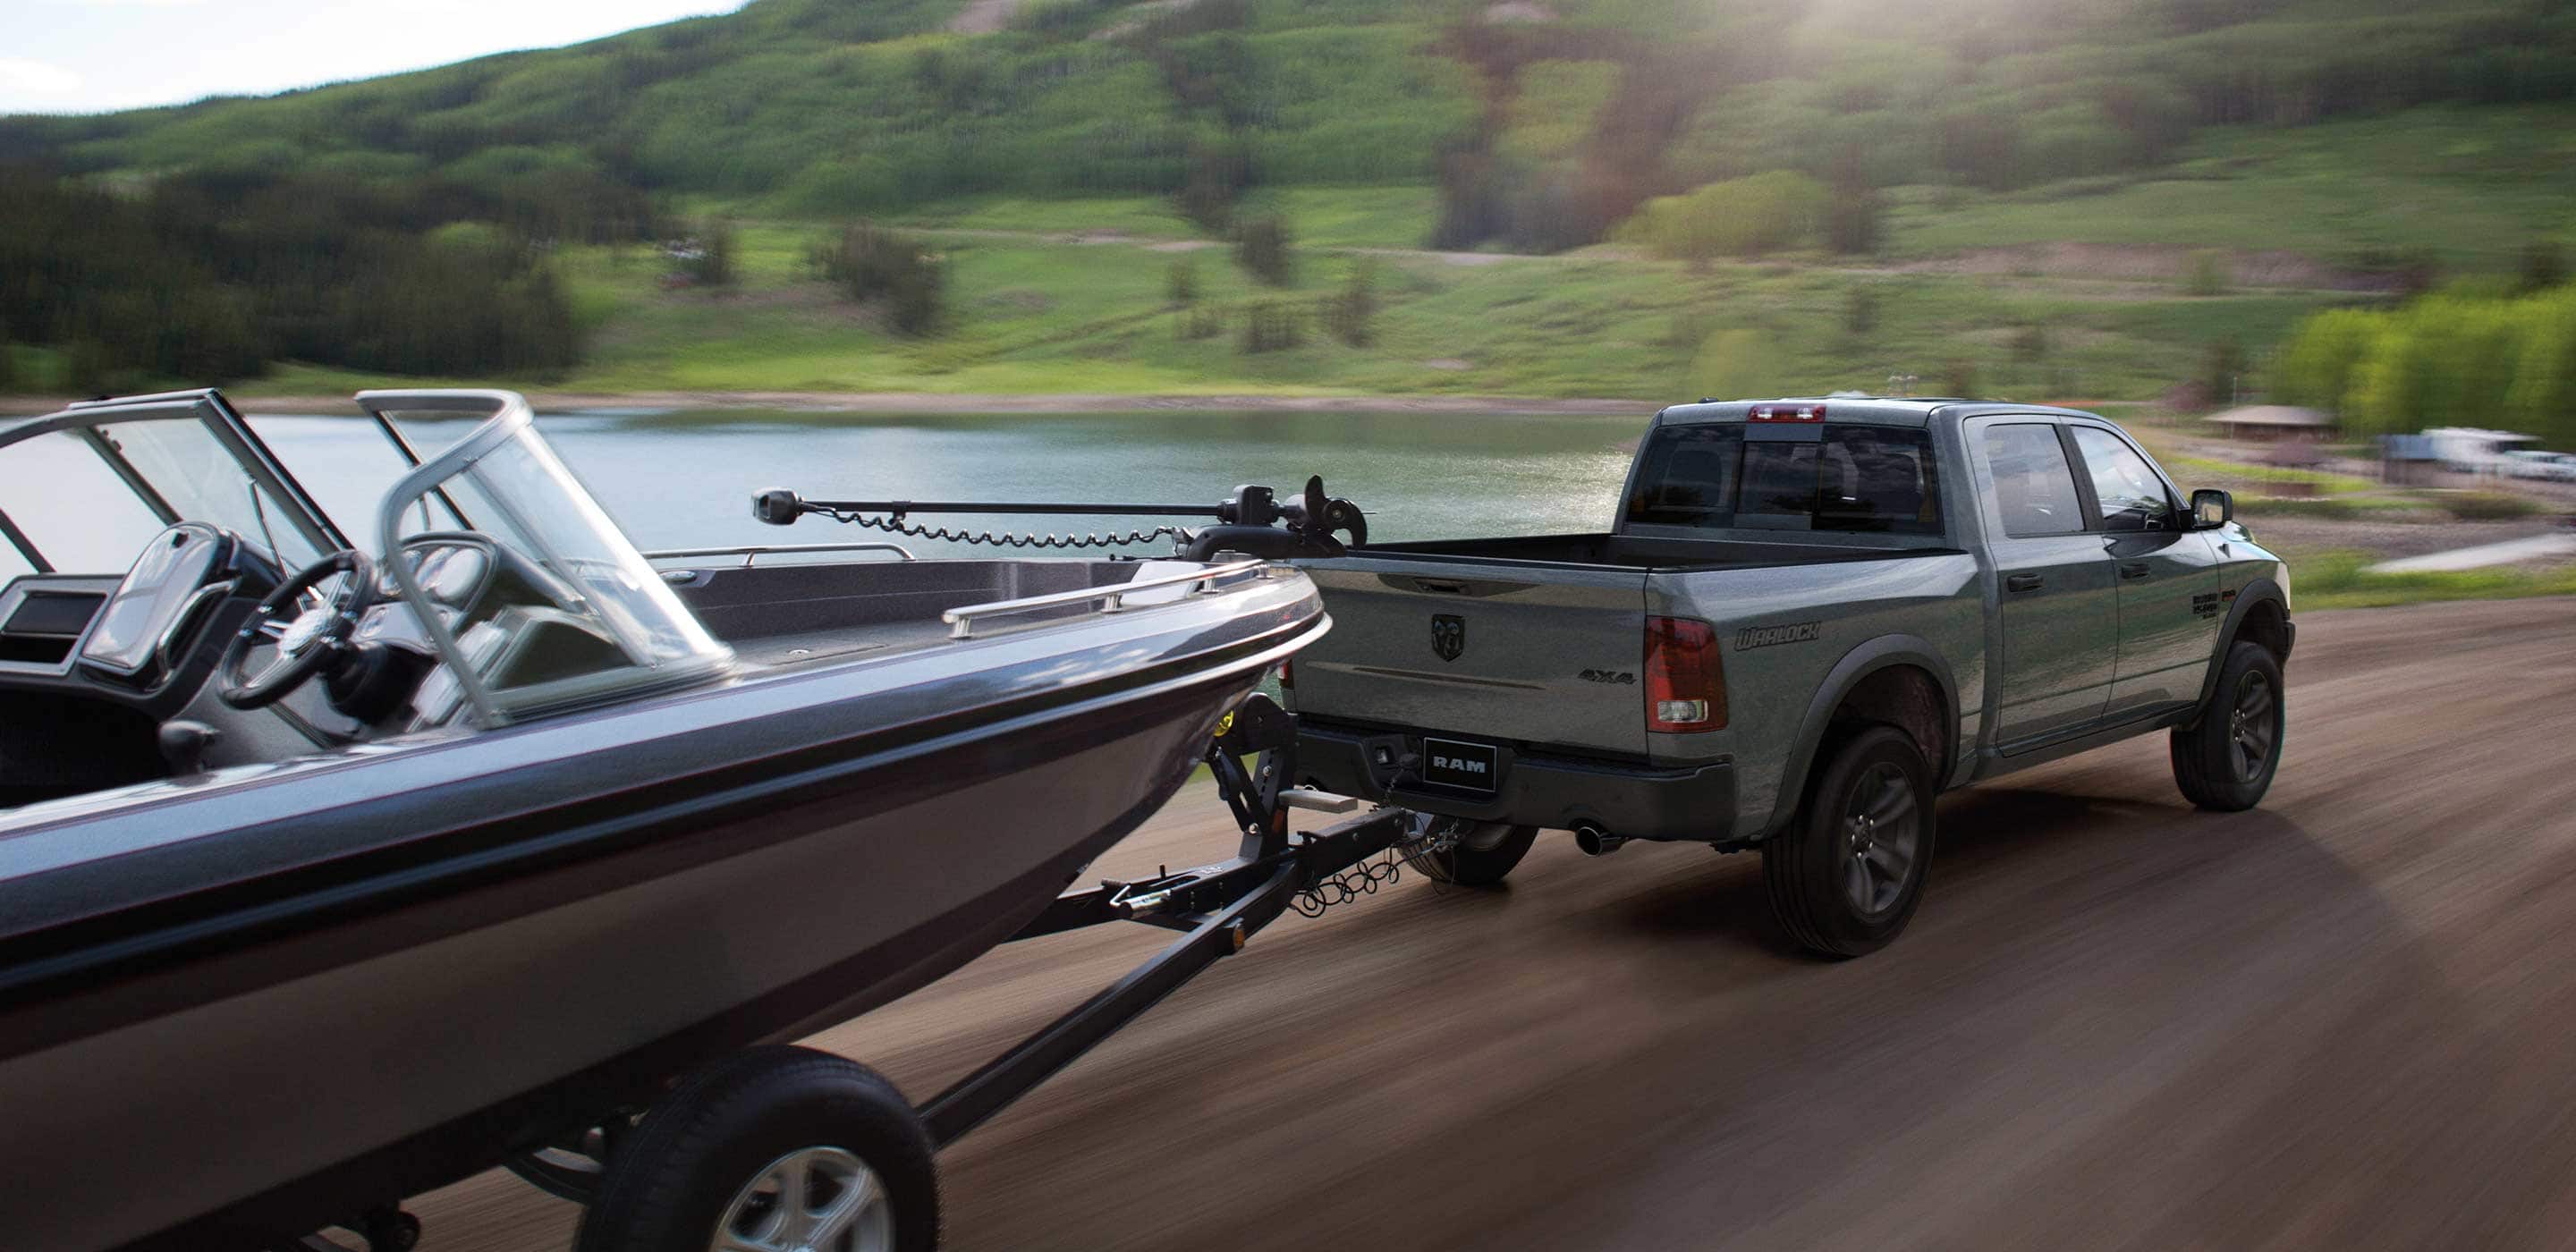 Display The 2022 Ram 1500 Classic towing a motorboat with the scenery blurred to indicate its speed.